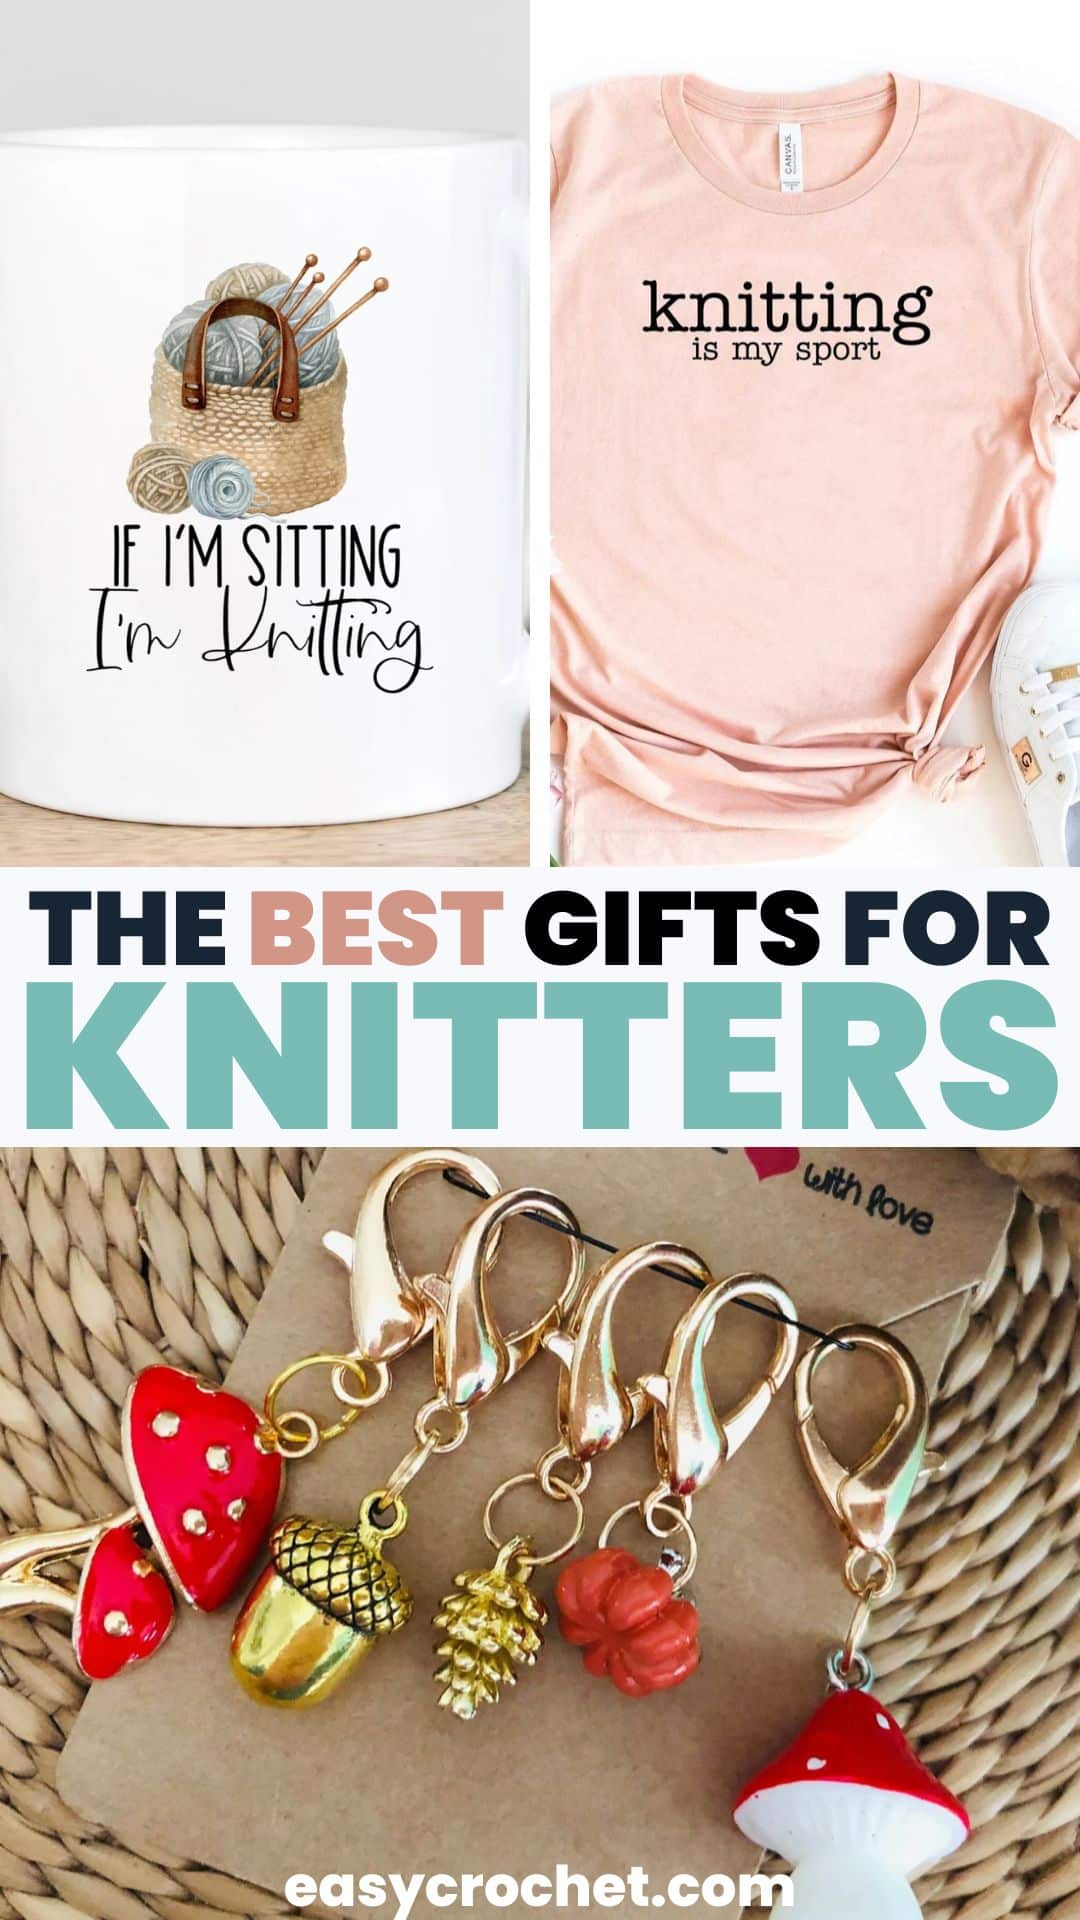 24 Gifts For Knitters